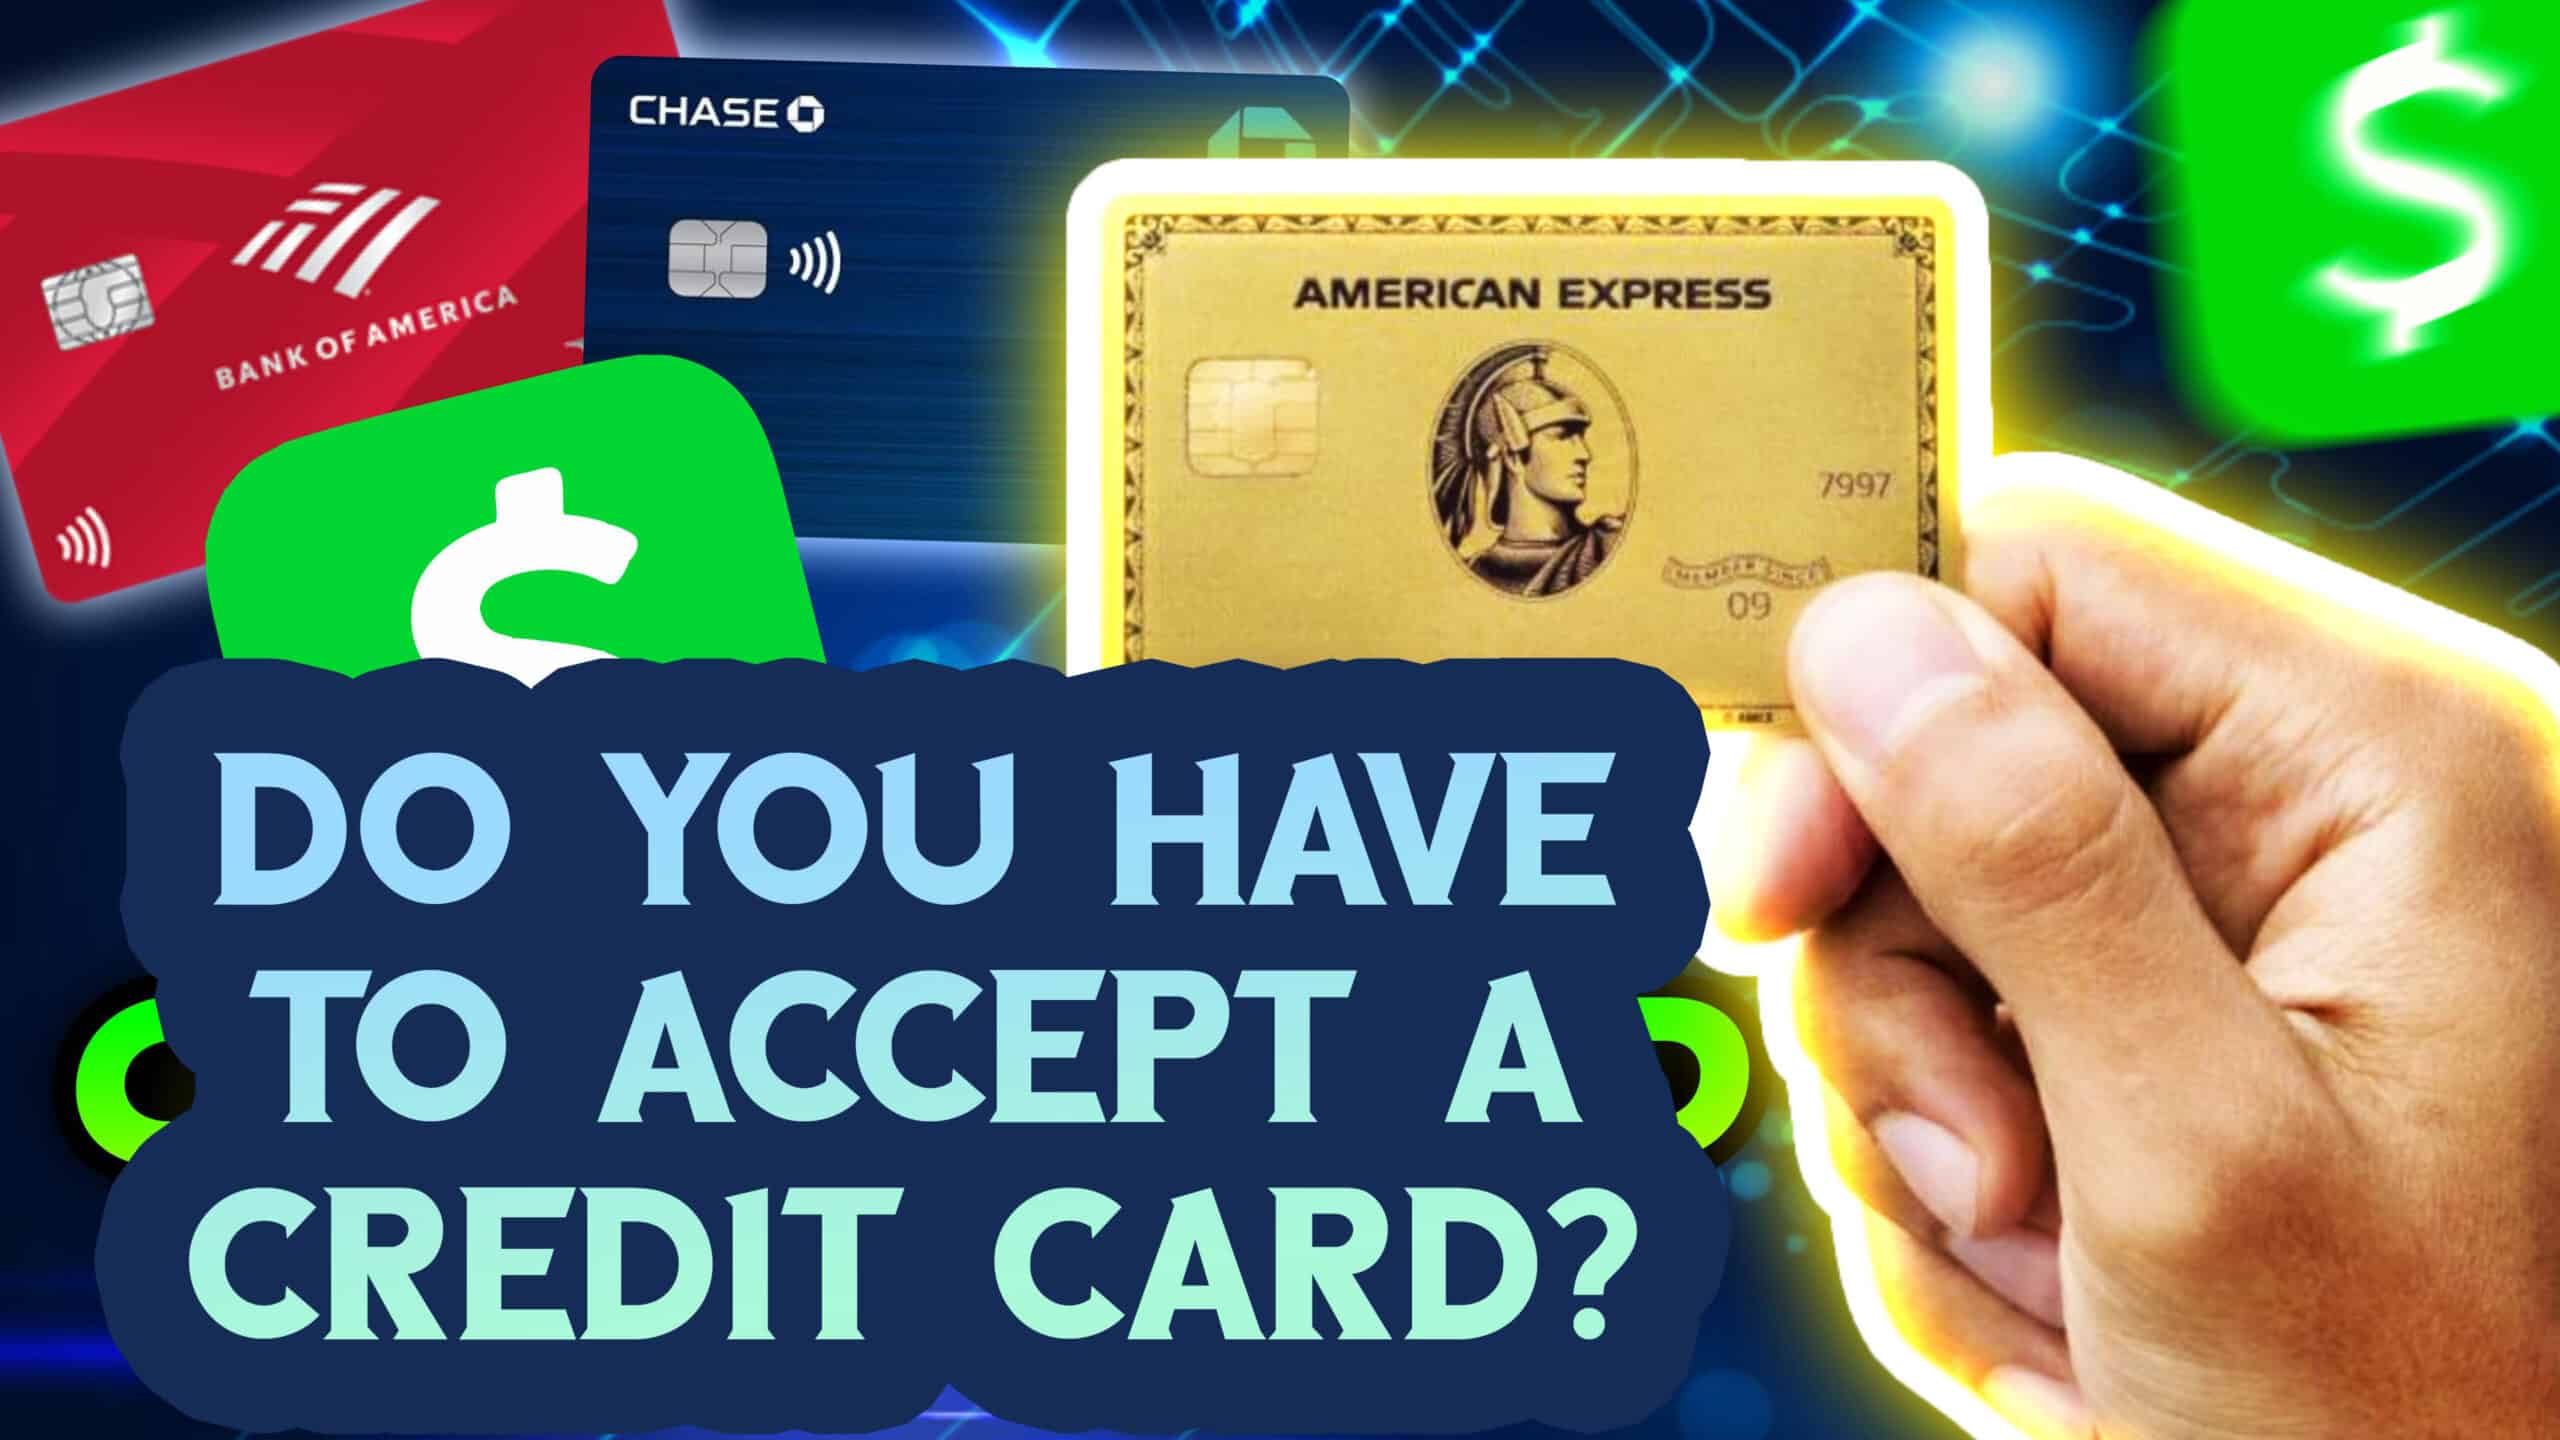 After the bank approves a credit card application, If You Apply for a Credit Card Do You Have to Accept It or can you decline the card approved bank